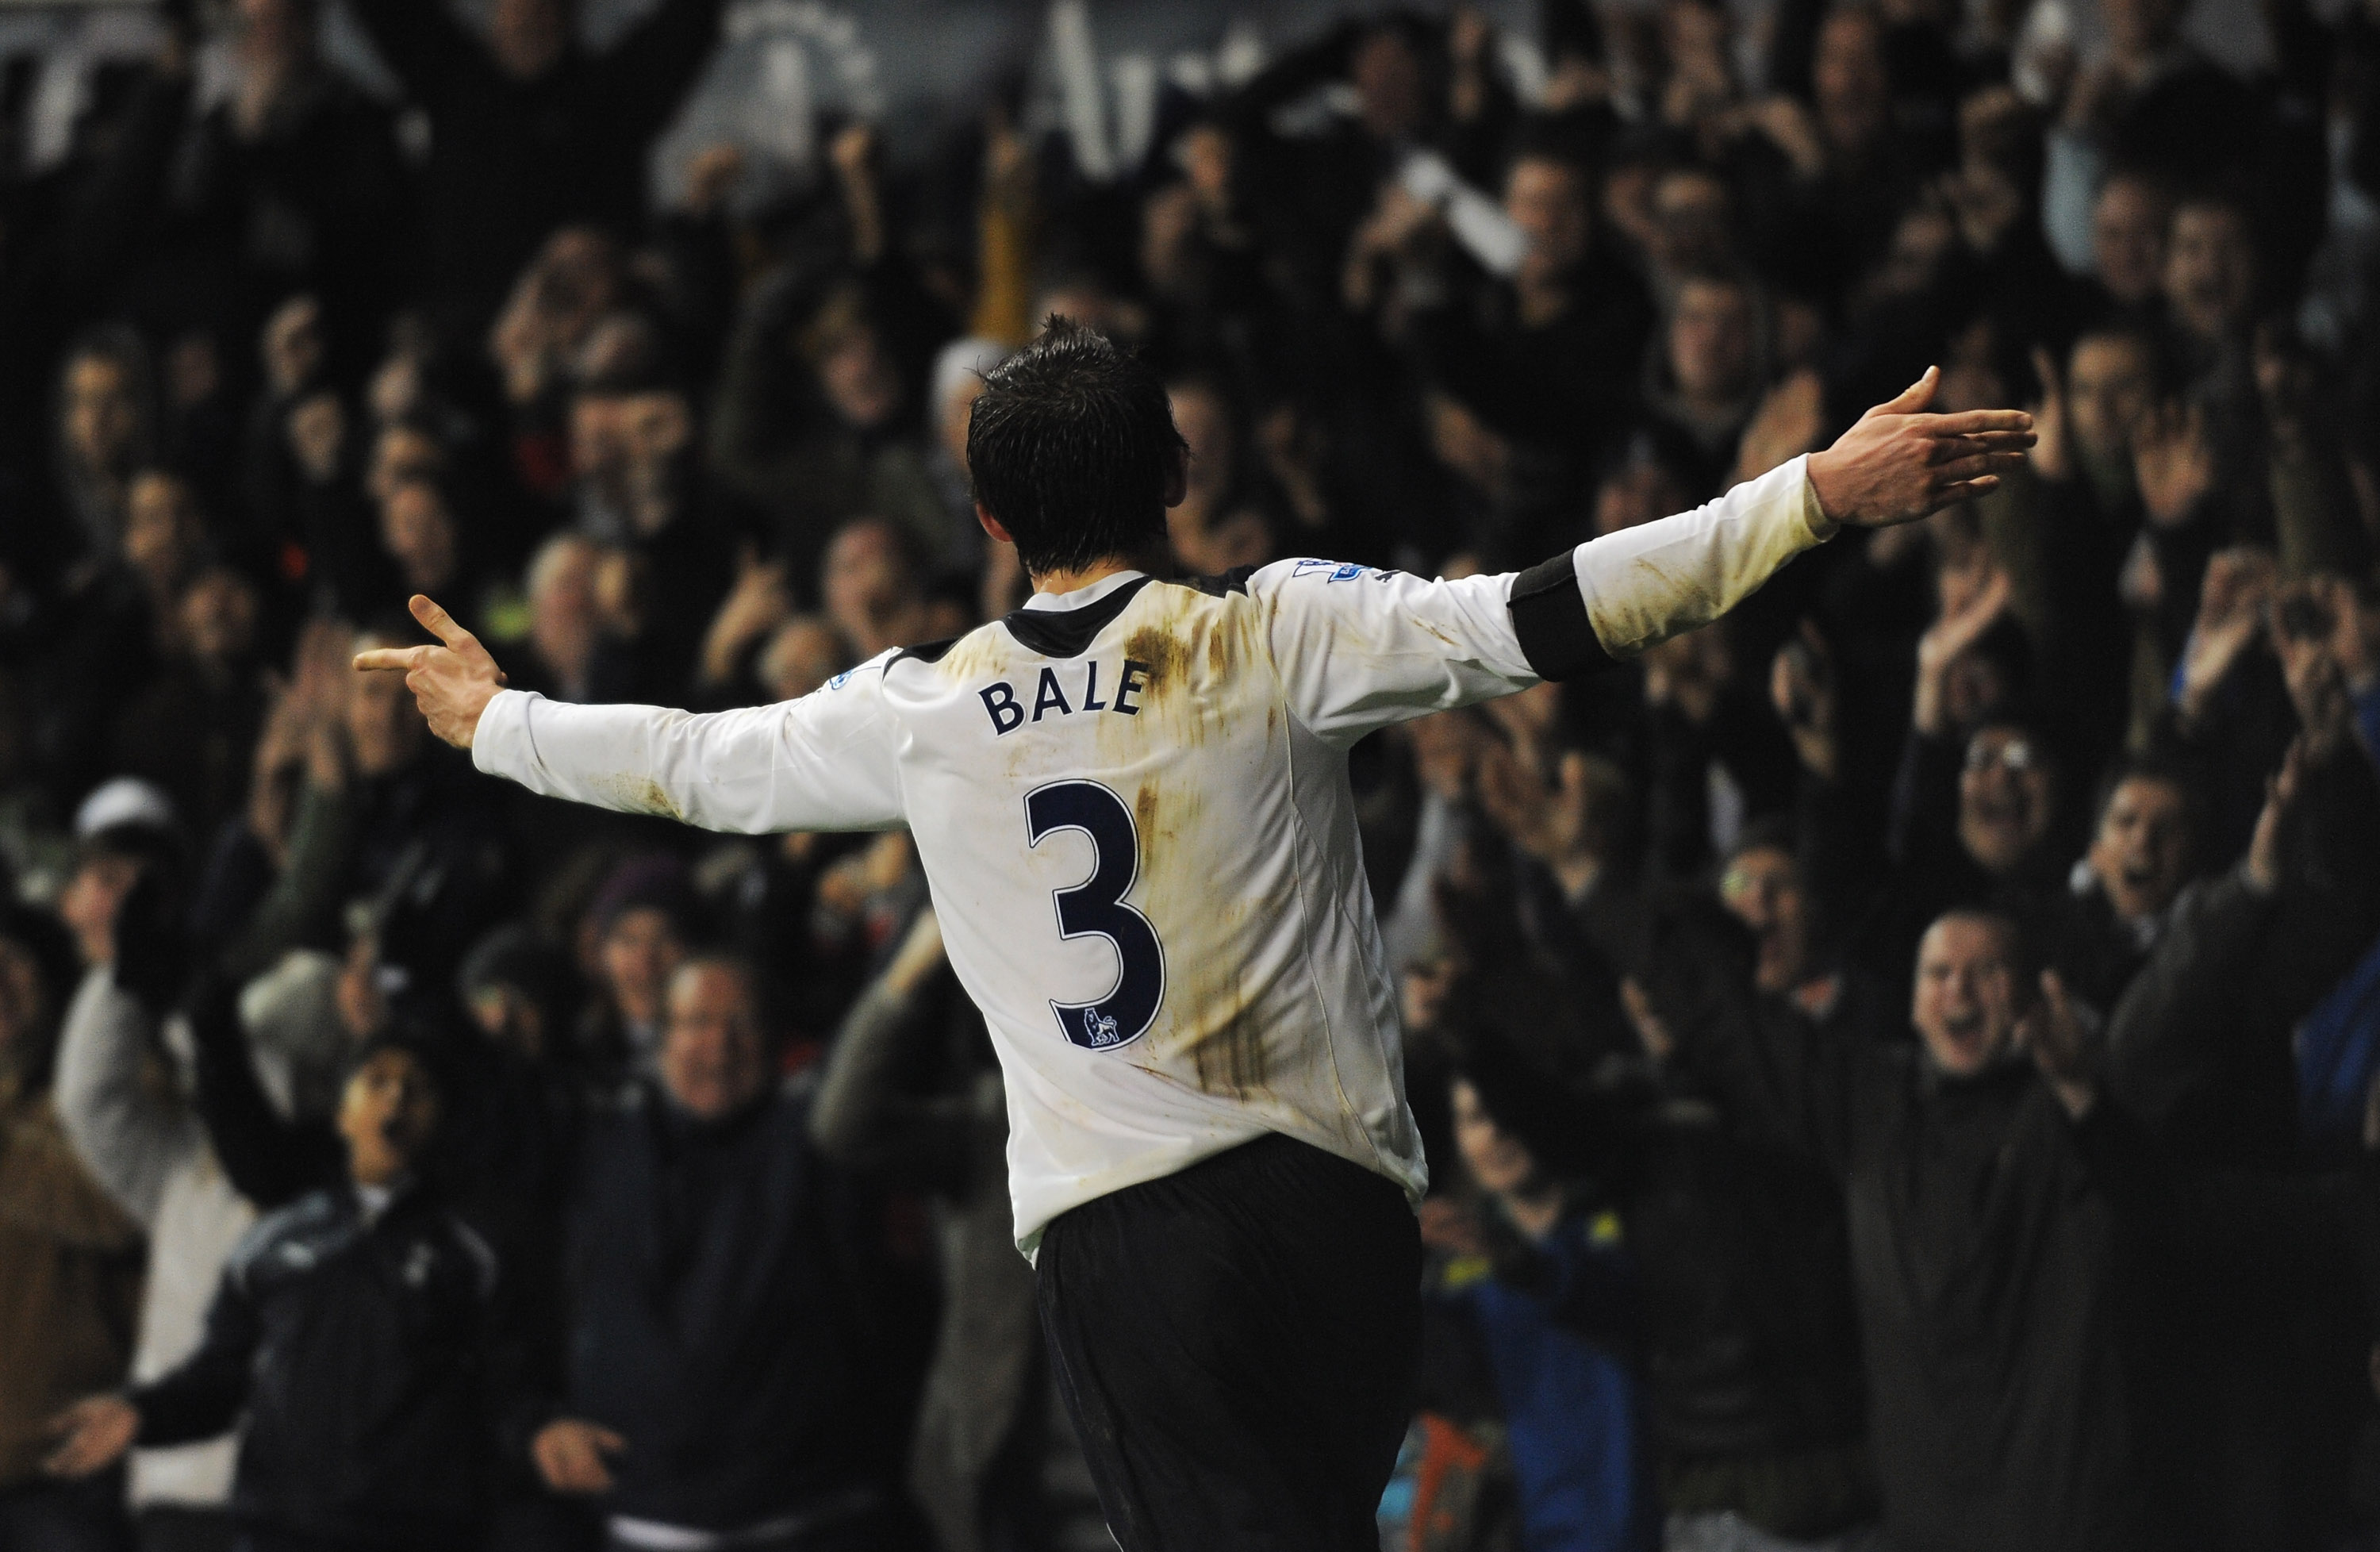 LONDON, ENGLAND - DECEMBER 28:  Gareth Bale of Tottenham Hotspur celebrates his team's second goal during the Barclays Premier League match between Tottenham Hotspur and Newcastle United at White Hart Lane on December 28, 2010 in London, England.  (Photo